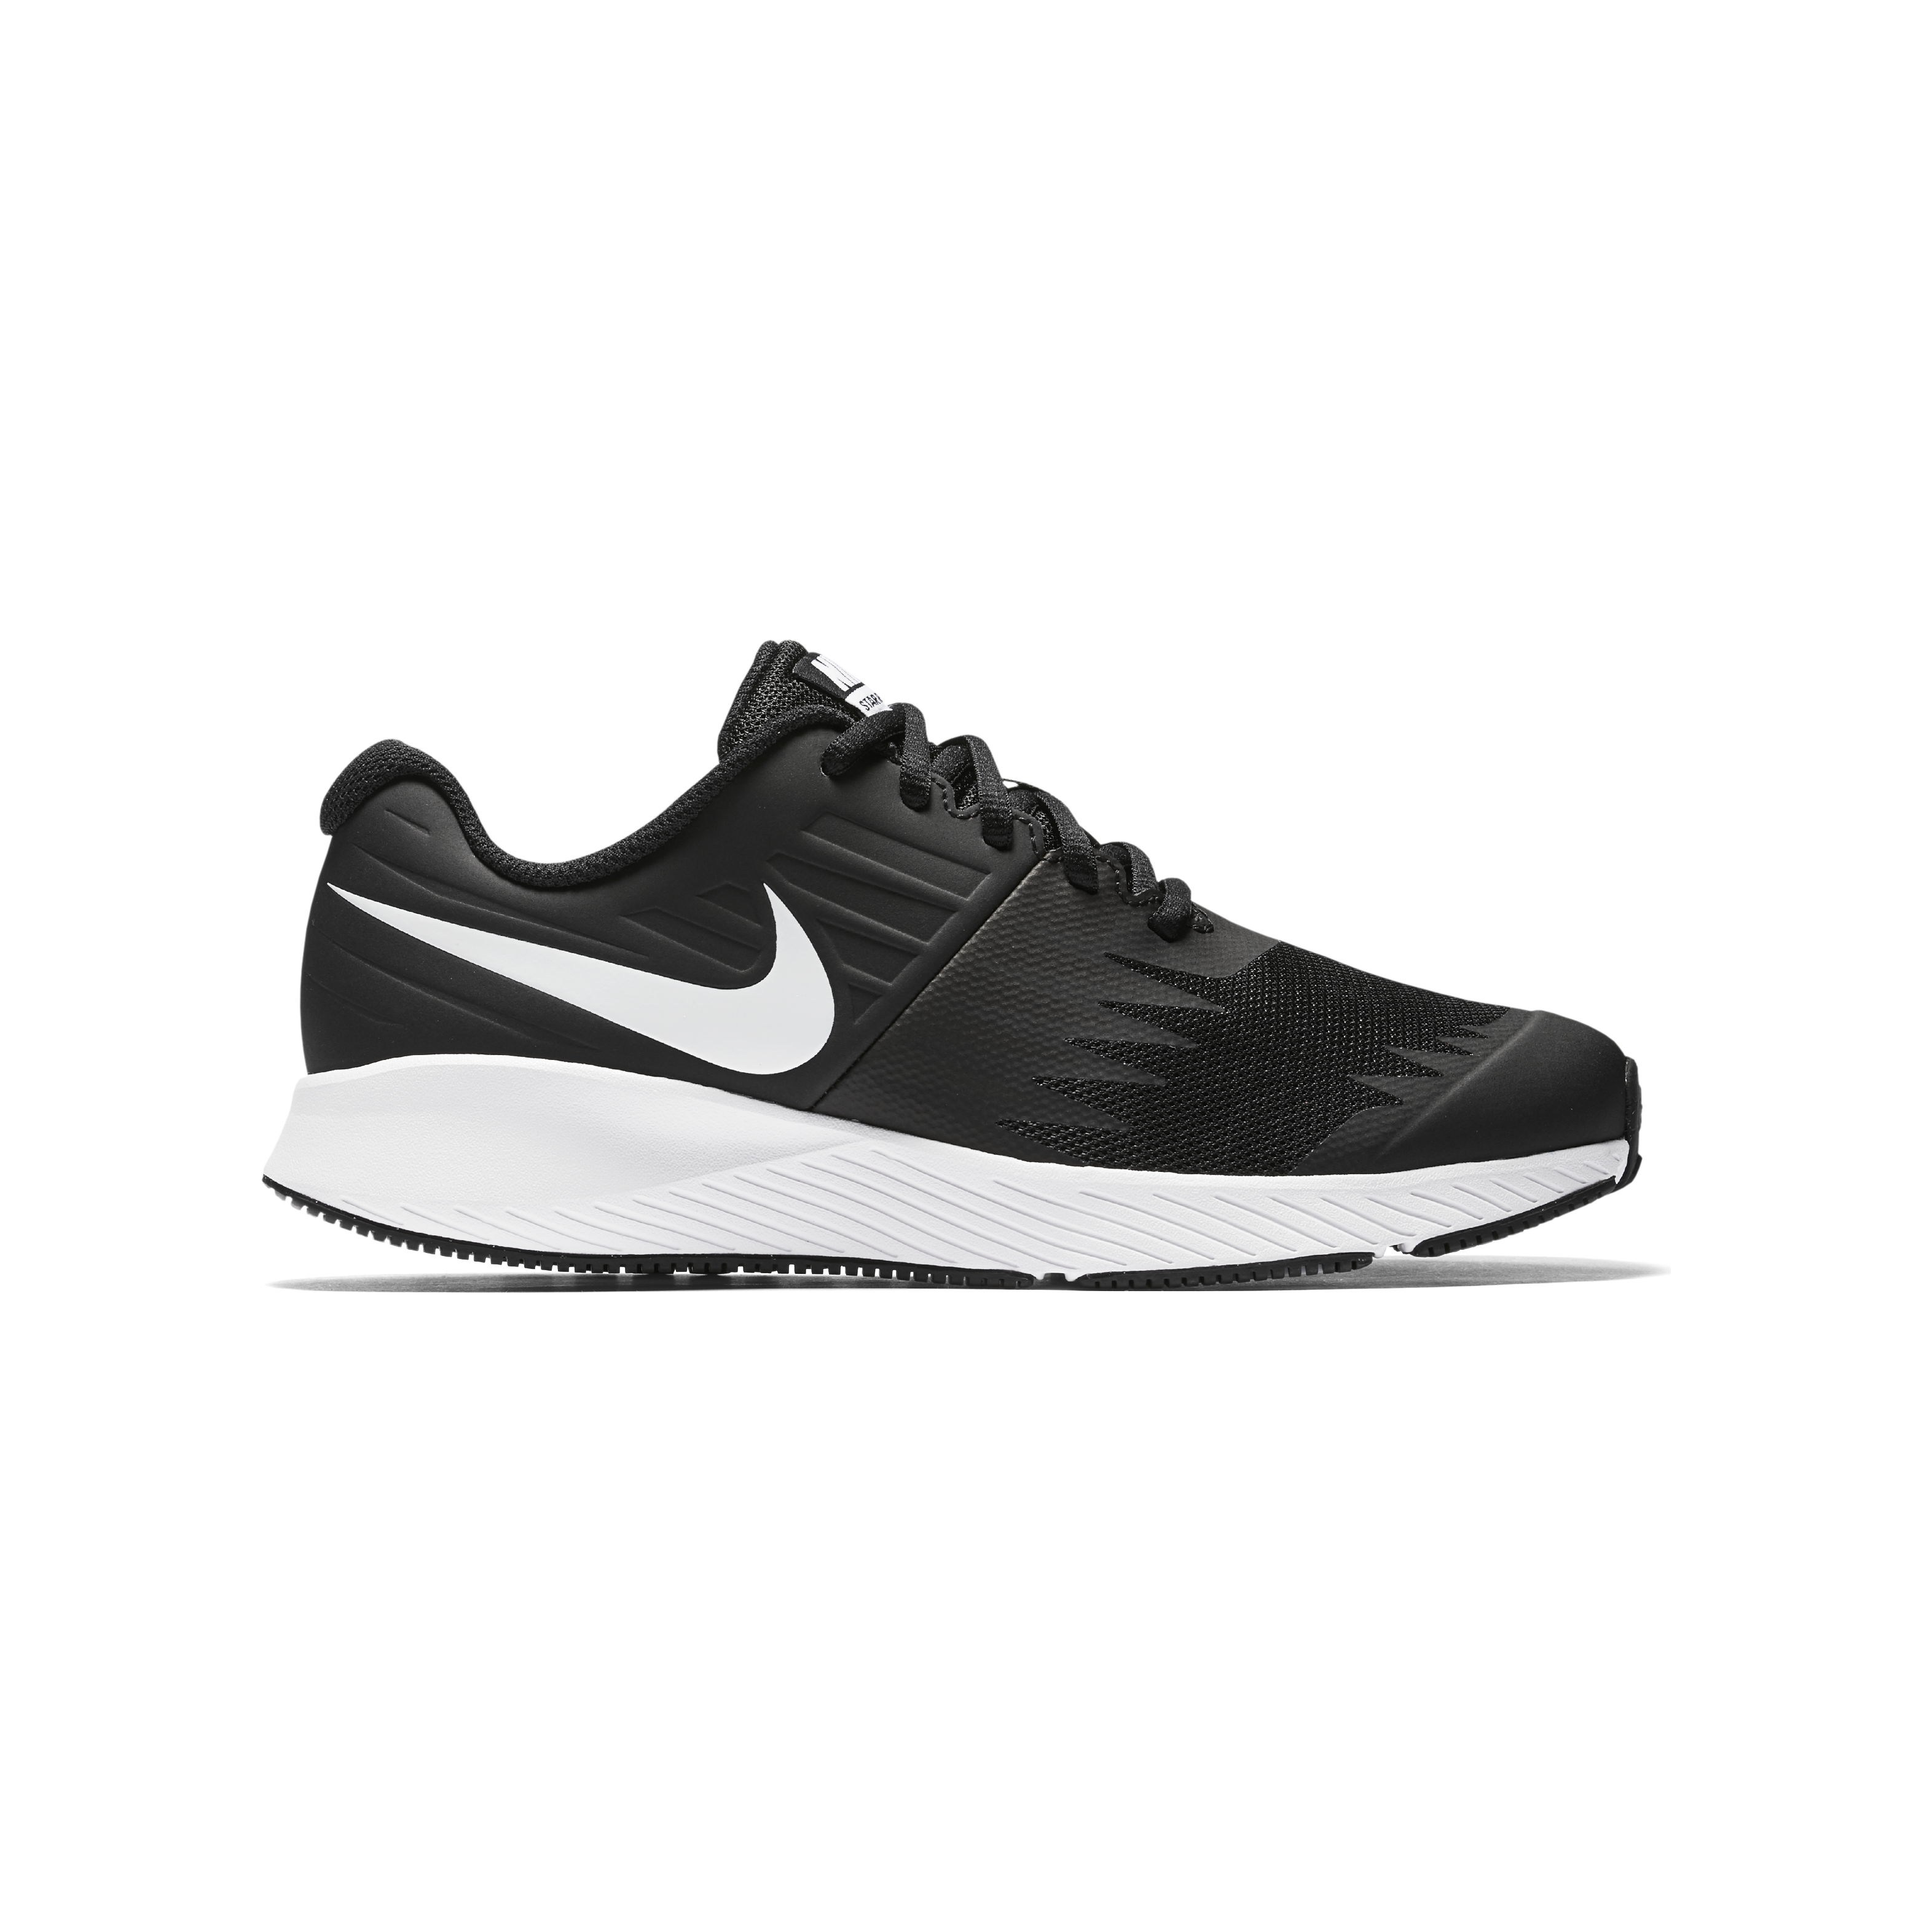 Nike Logo Shoes Brand Png Transparent Background Free - vrogue.co